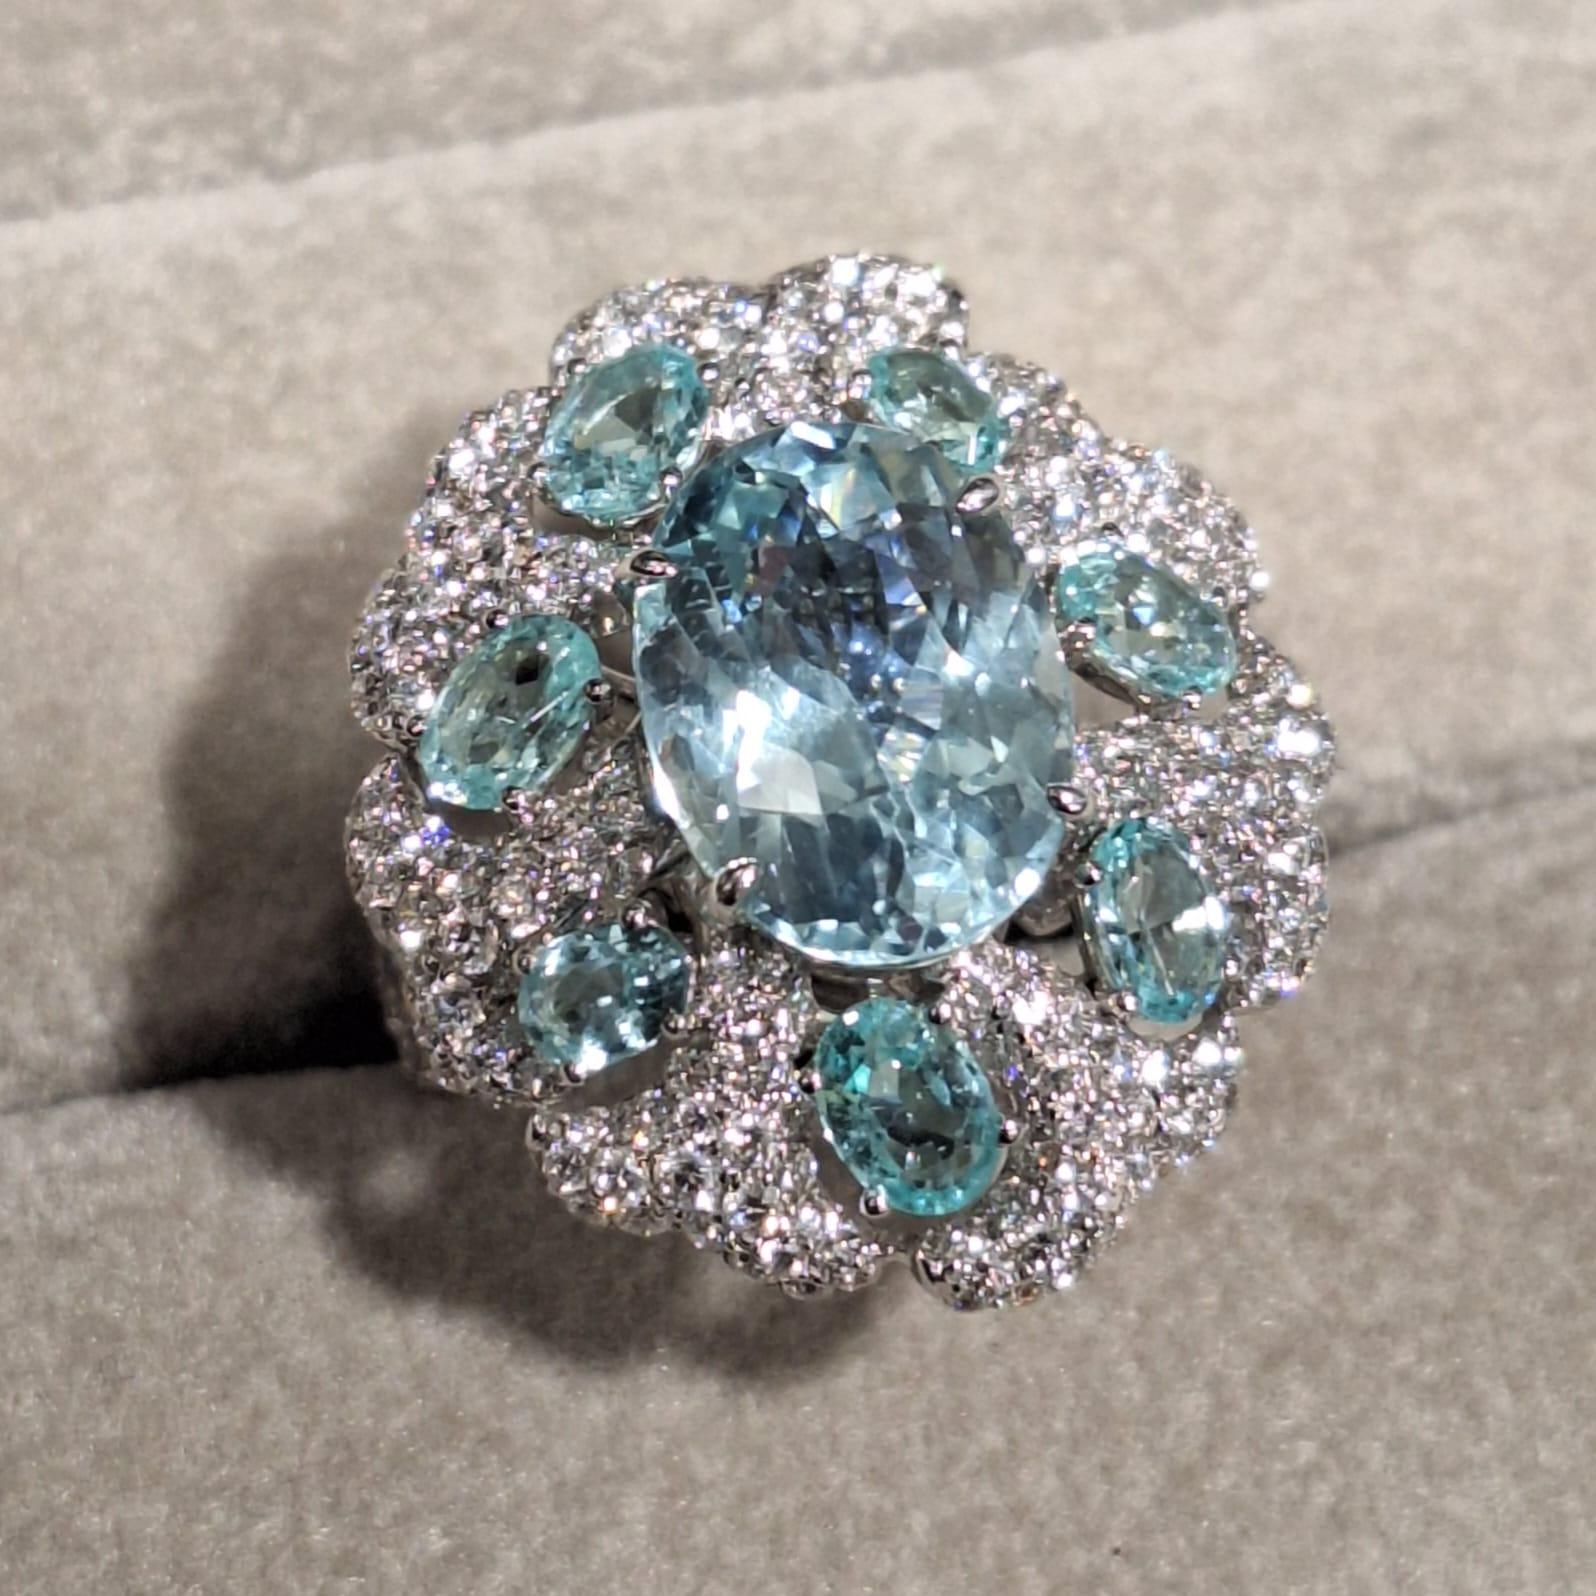 18K White Gold Diamond Ring with Paraiba

Paraiba Tourmaline makes an effective healing stone that brings hope, joy and luck. Provides greater mental clarity and tranquility.

Diamonds symbolise clarity and purity, also represent innocence,